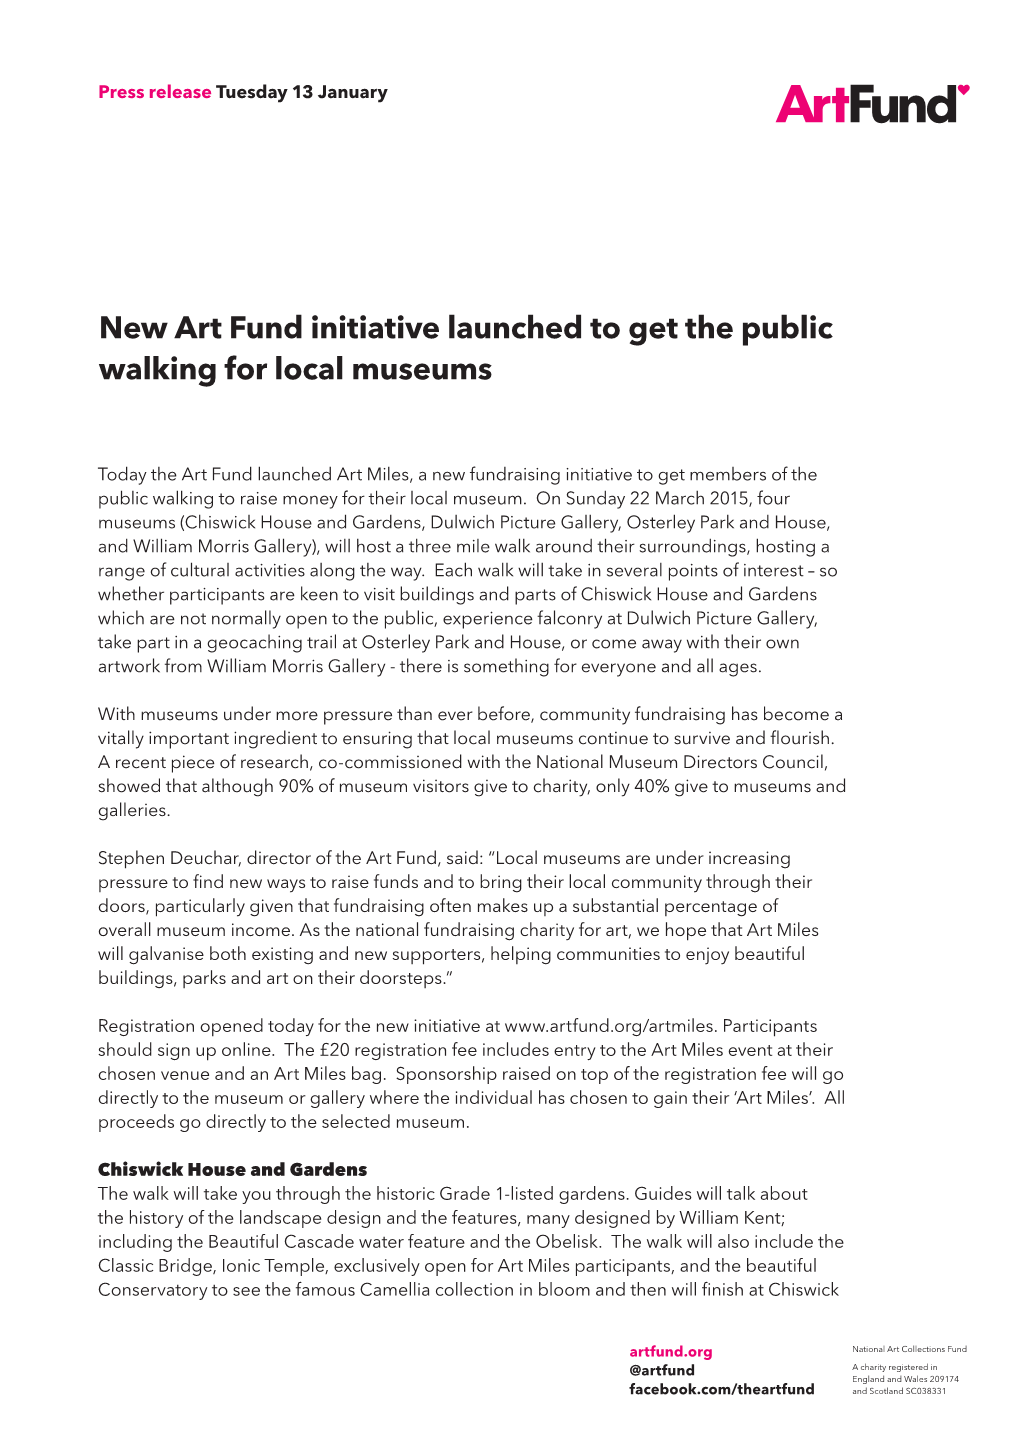 New Art Fund Initiative Launched to Get the Public Walking for Local Museums